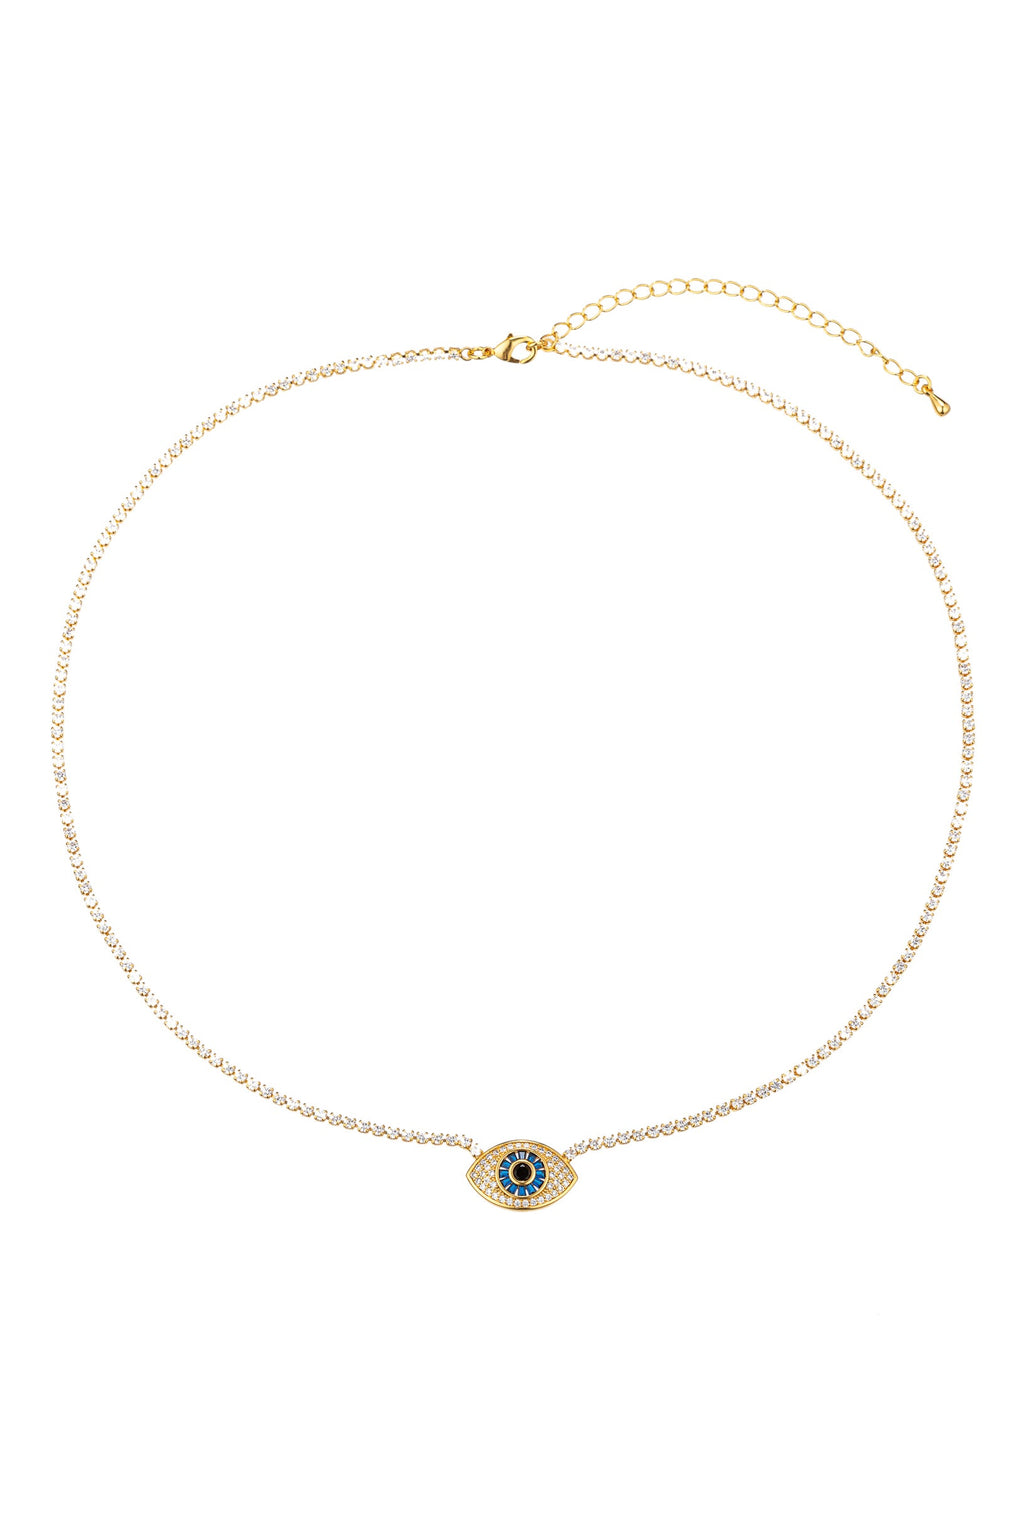 Embrace protection and style with this evil eye tennis necklace adorned with cubic zirconia, a chic and symbolic accessory.